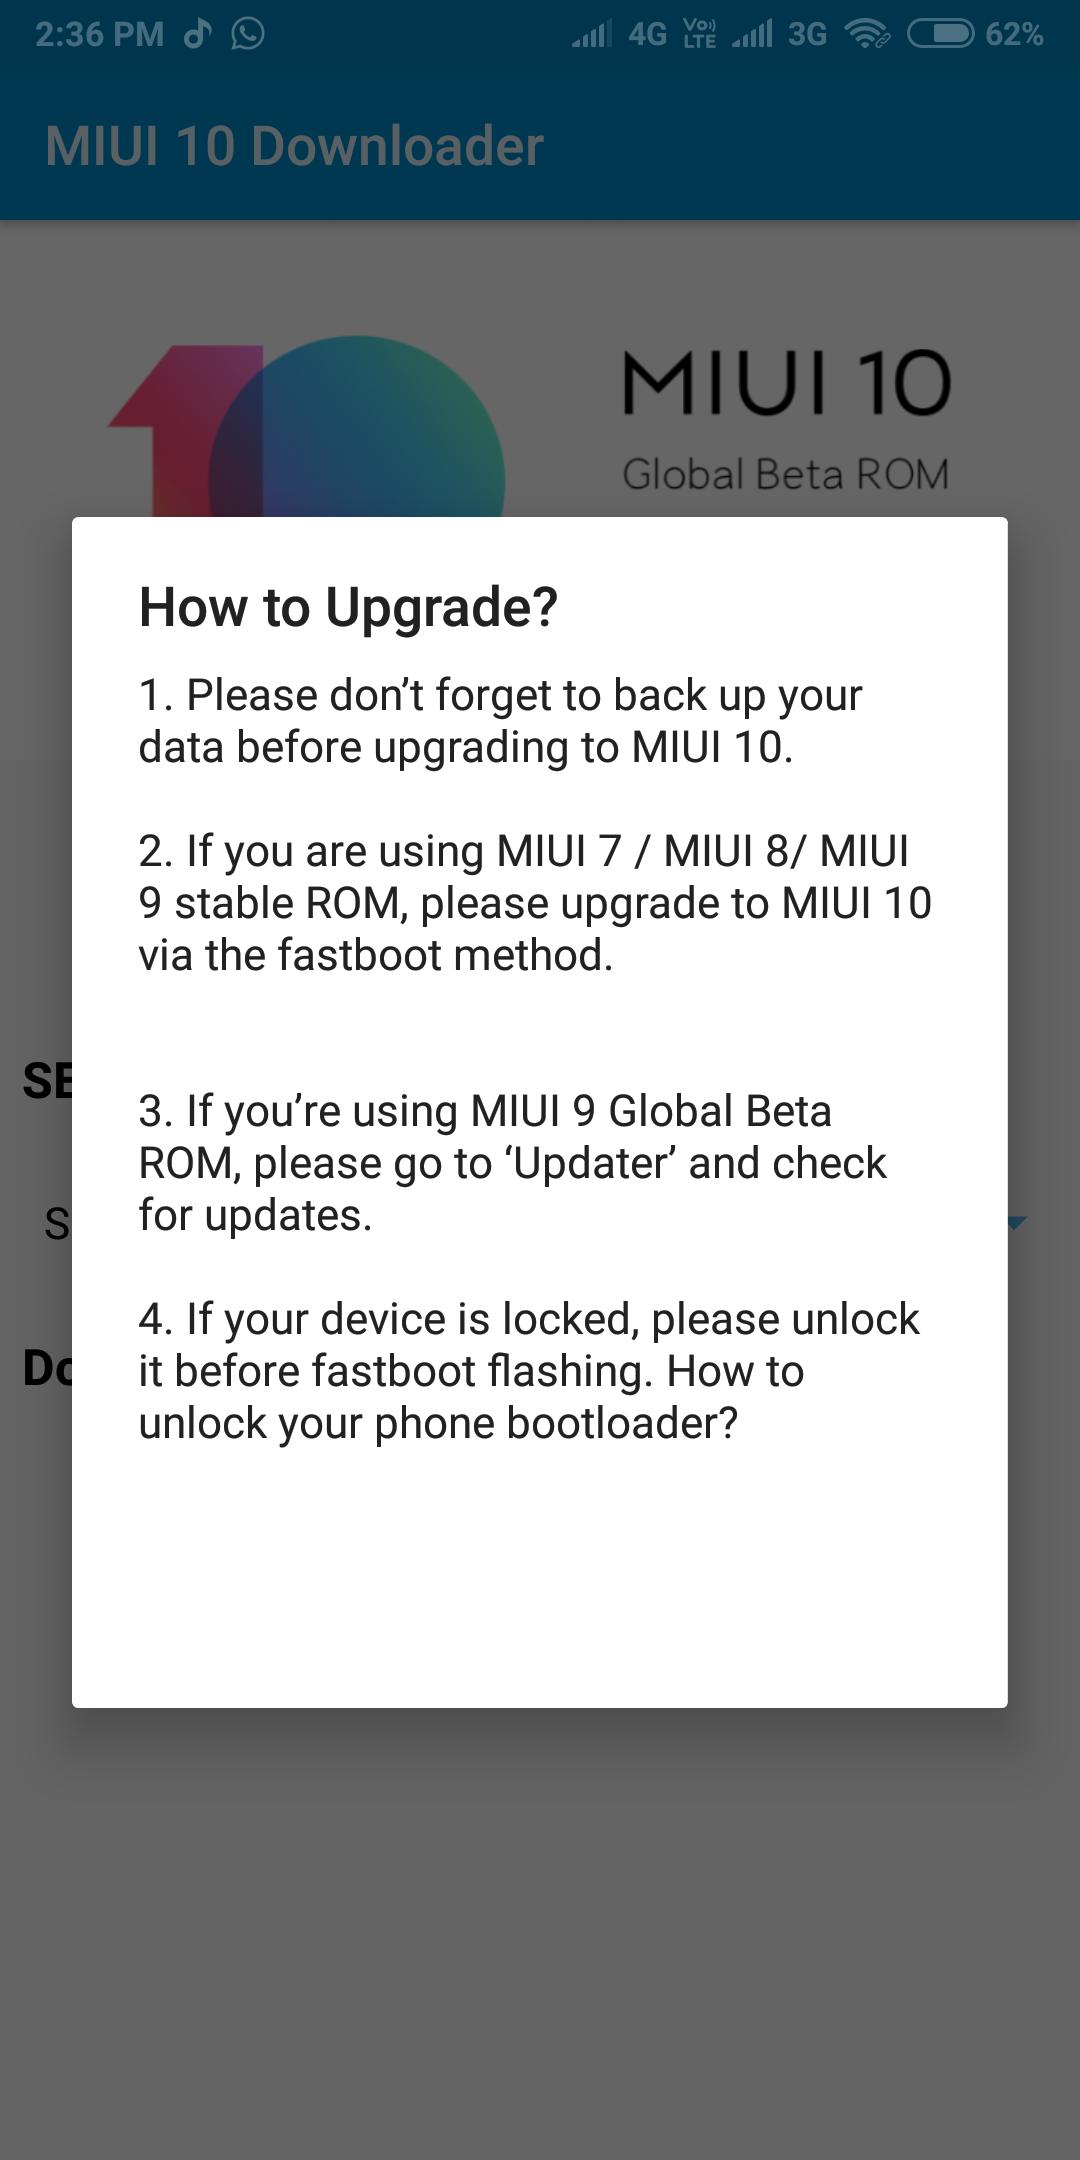 Miui 10 Downloader For Android Apk Download